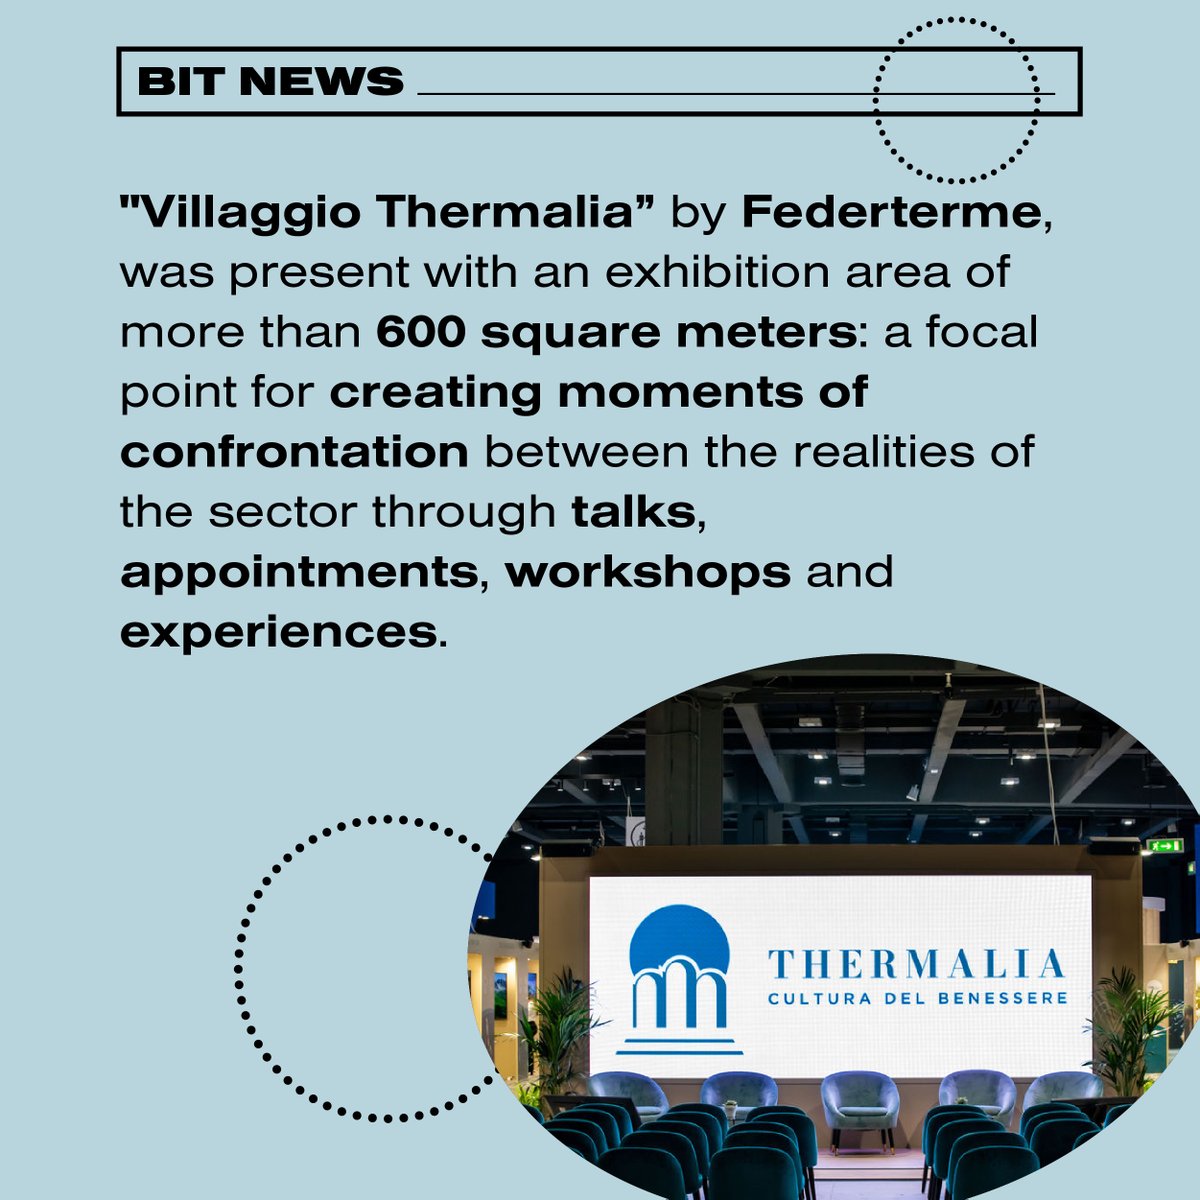 Wellness Tourism is blooming. How are facilities moving to meet these needs? Thermalia by Federterme drew many visitors at the recent BIT edition. Let's find out in the post! #bitfieramilano #seviaggisivede #fieramilano #bit2024